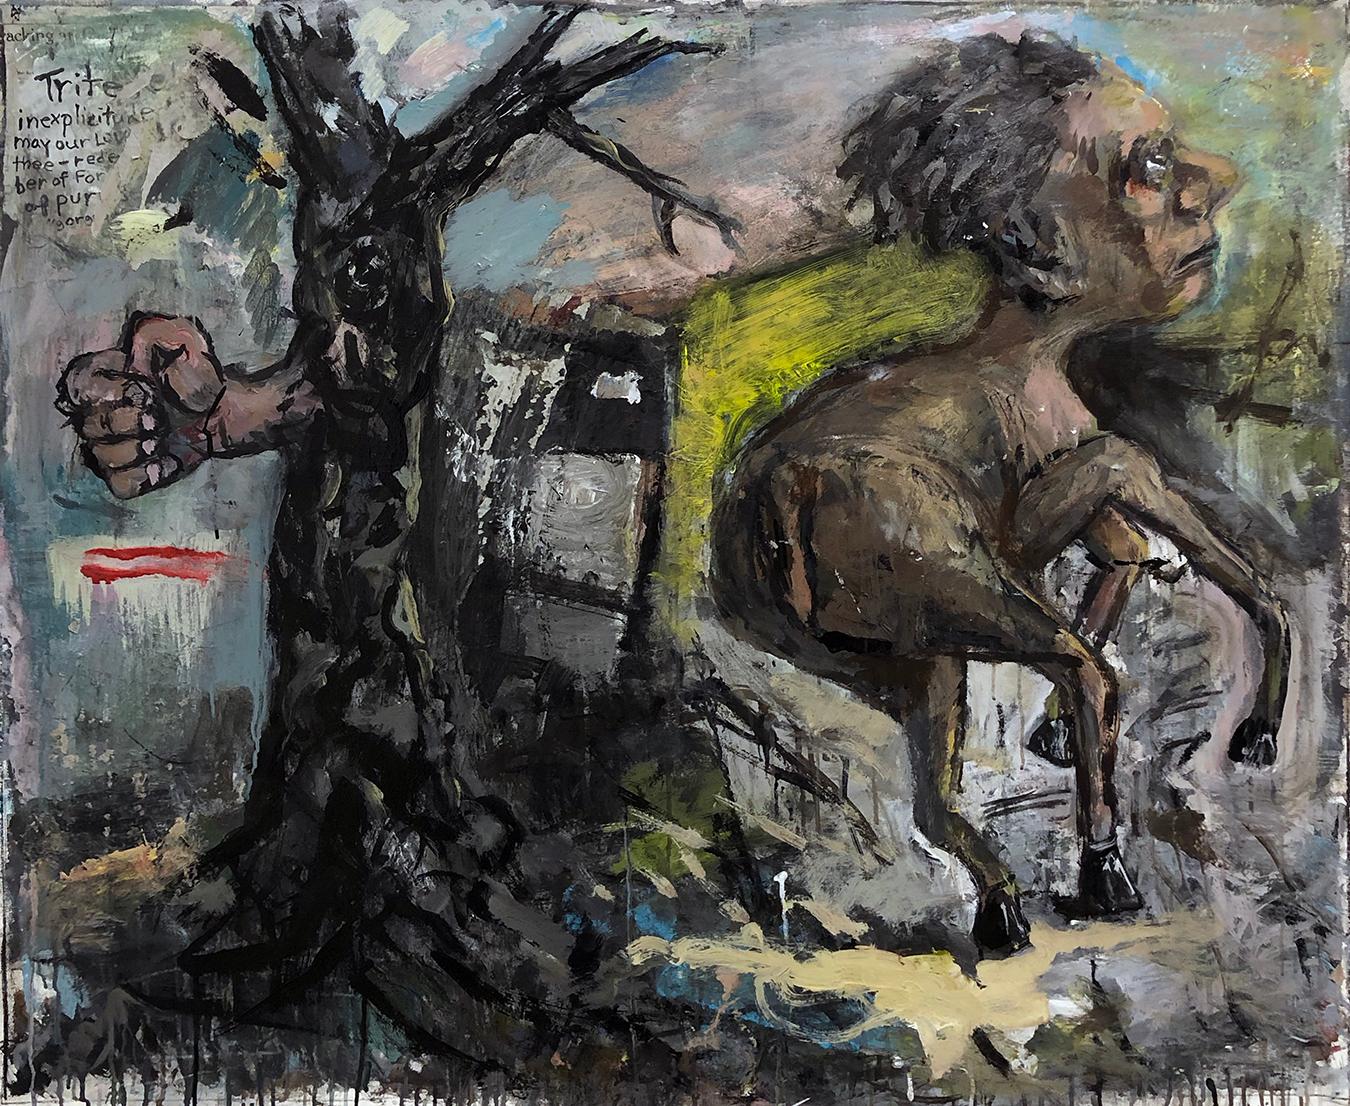 Dale Williams Figurative Painting - "Outskirts", acrylic painting, duality, nature, humanity, chaos, dream, myth